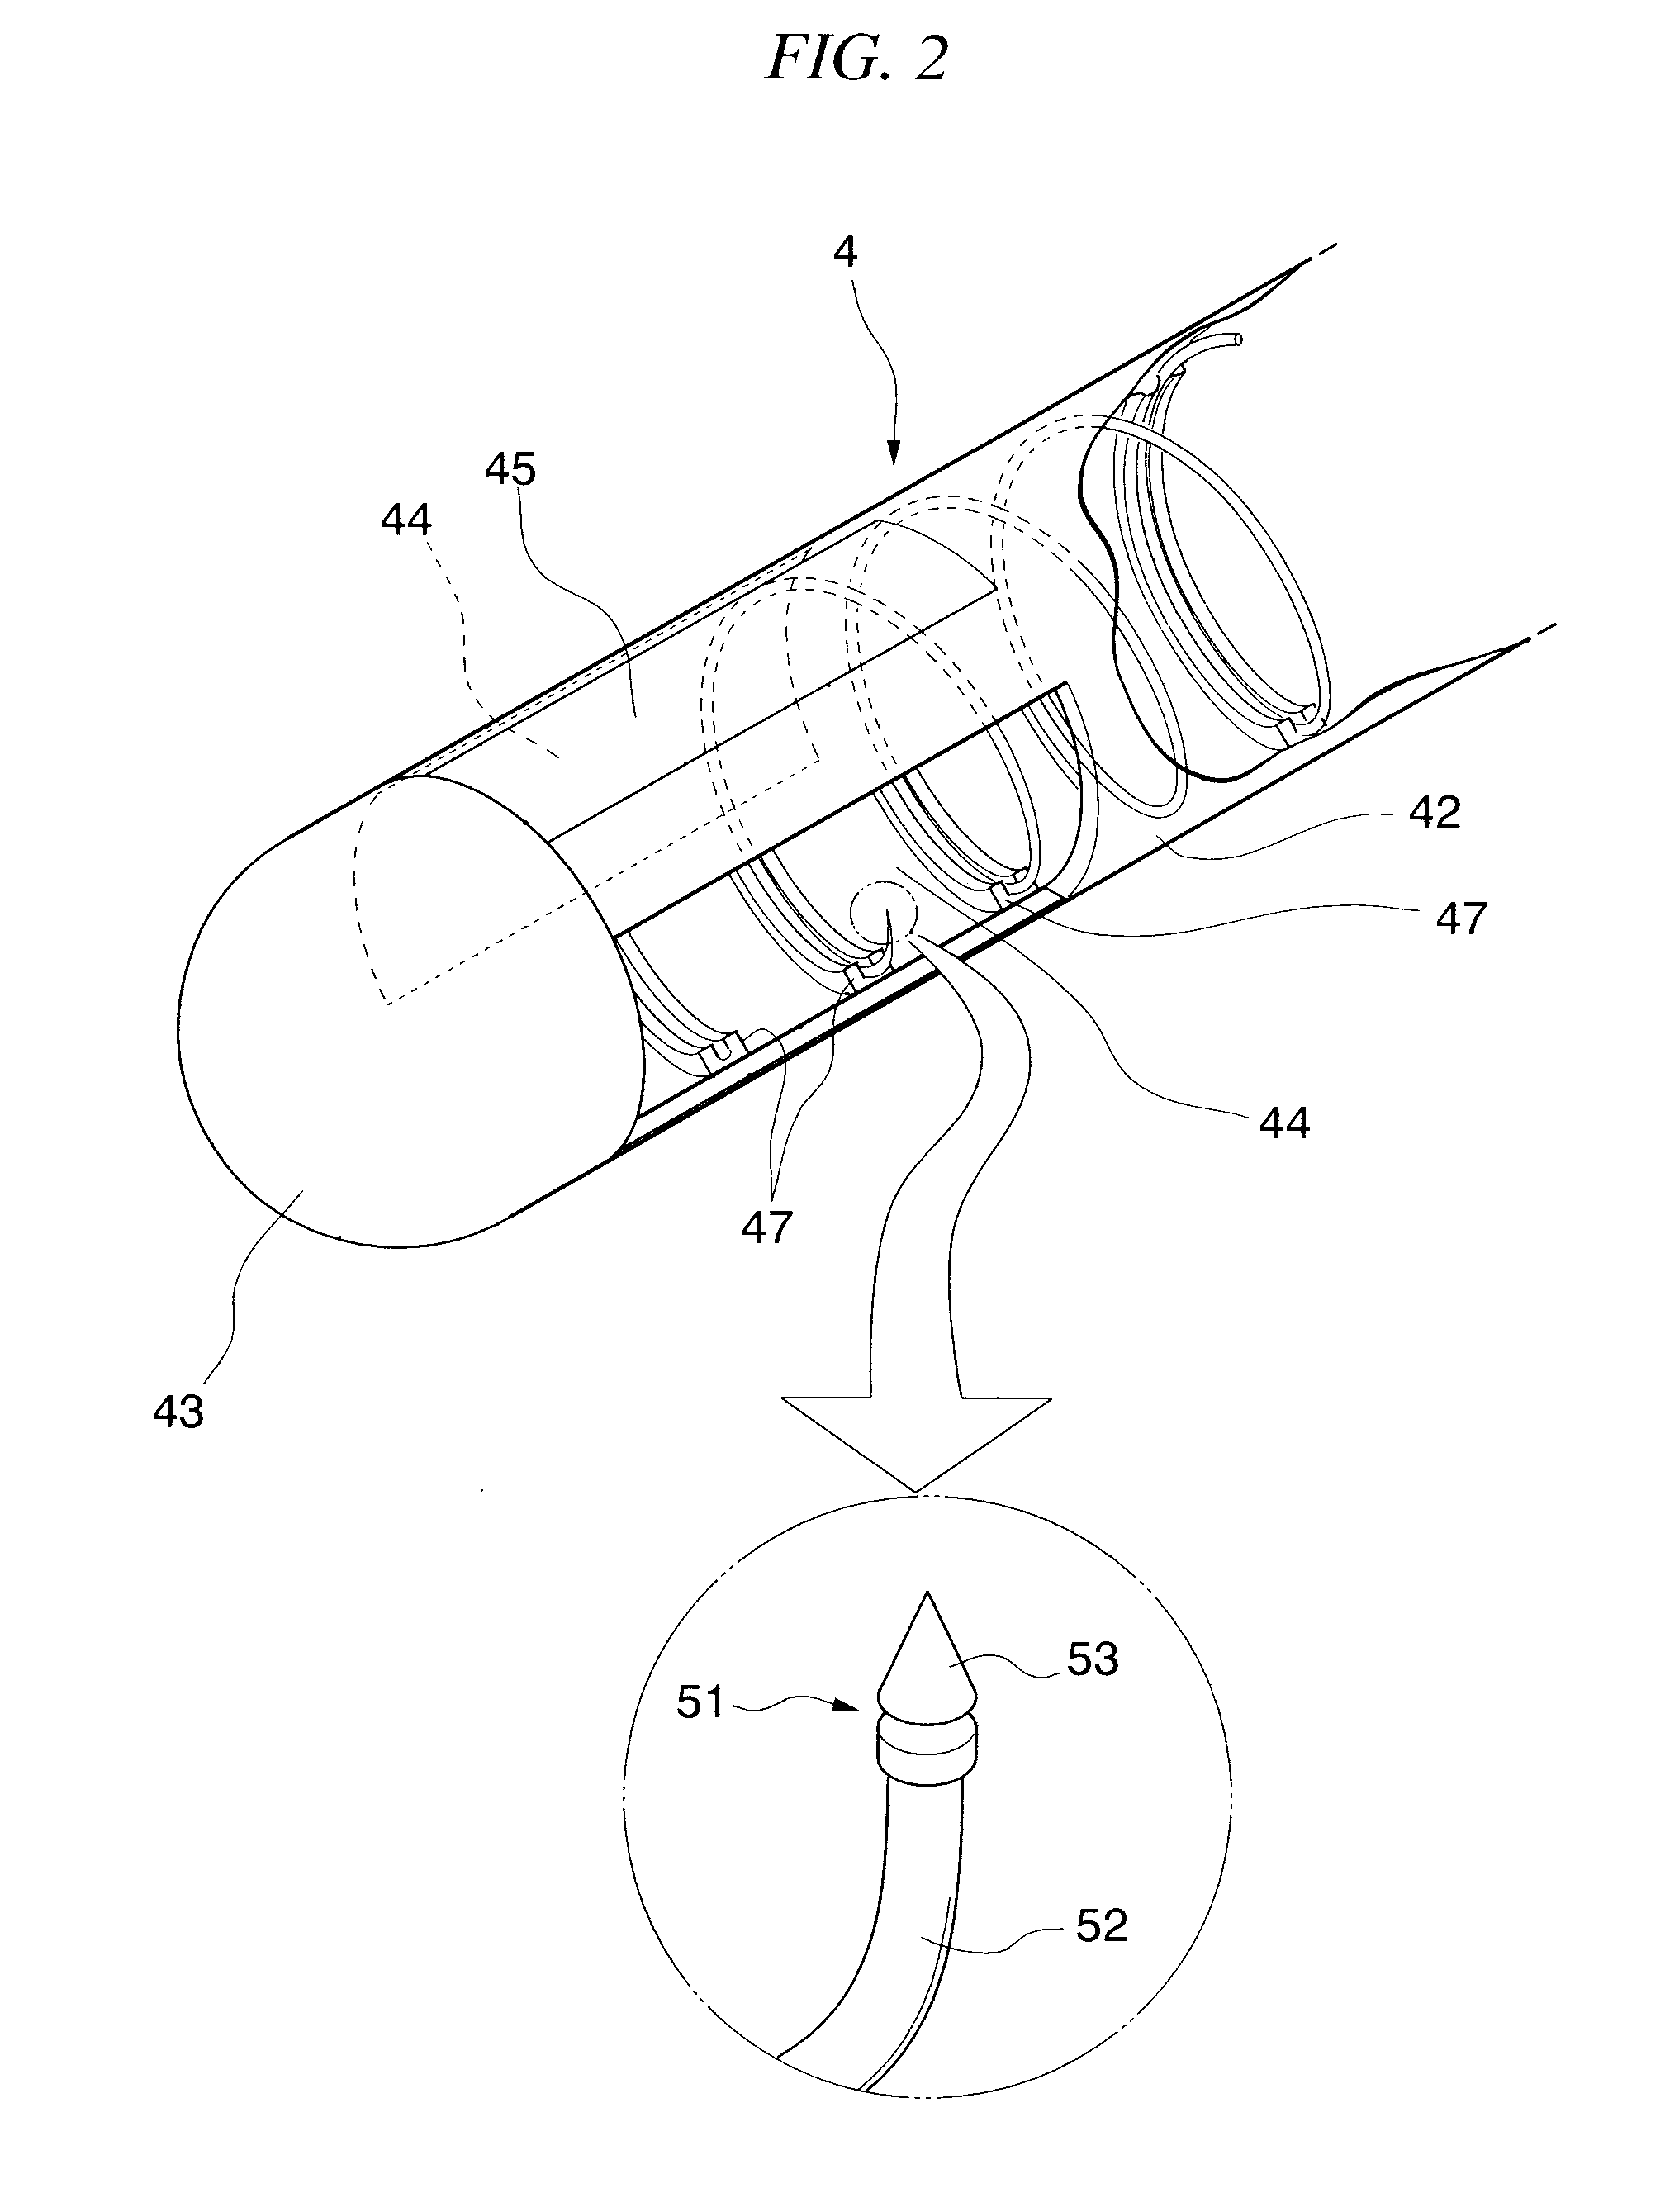 Gastric therapy system and method for suturing gastric wall